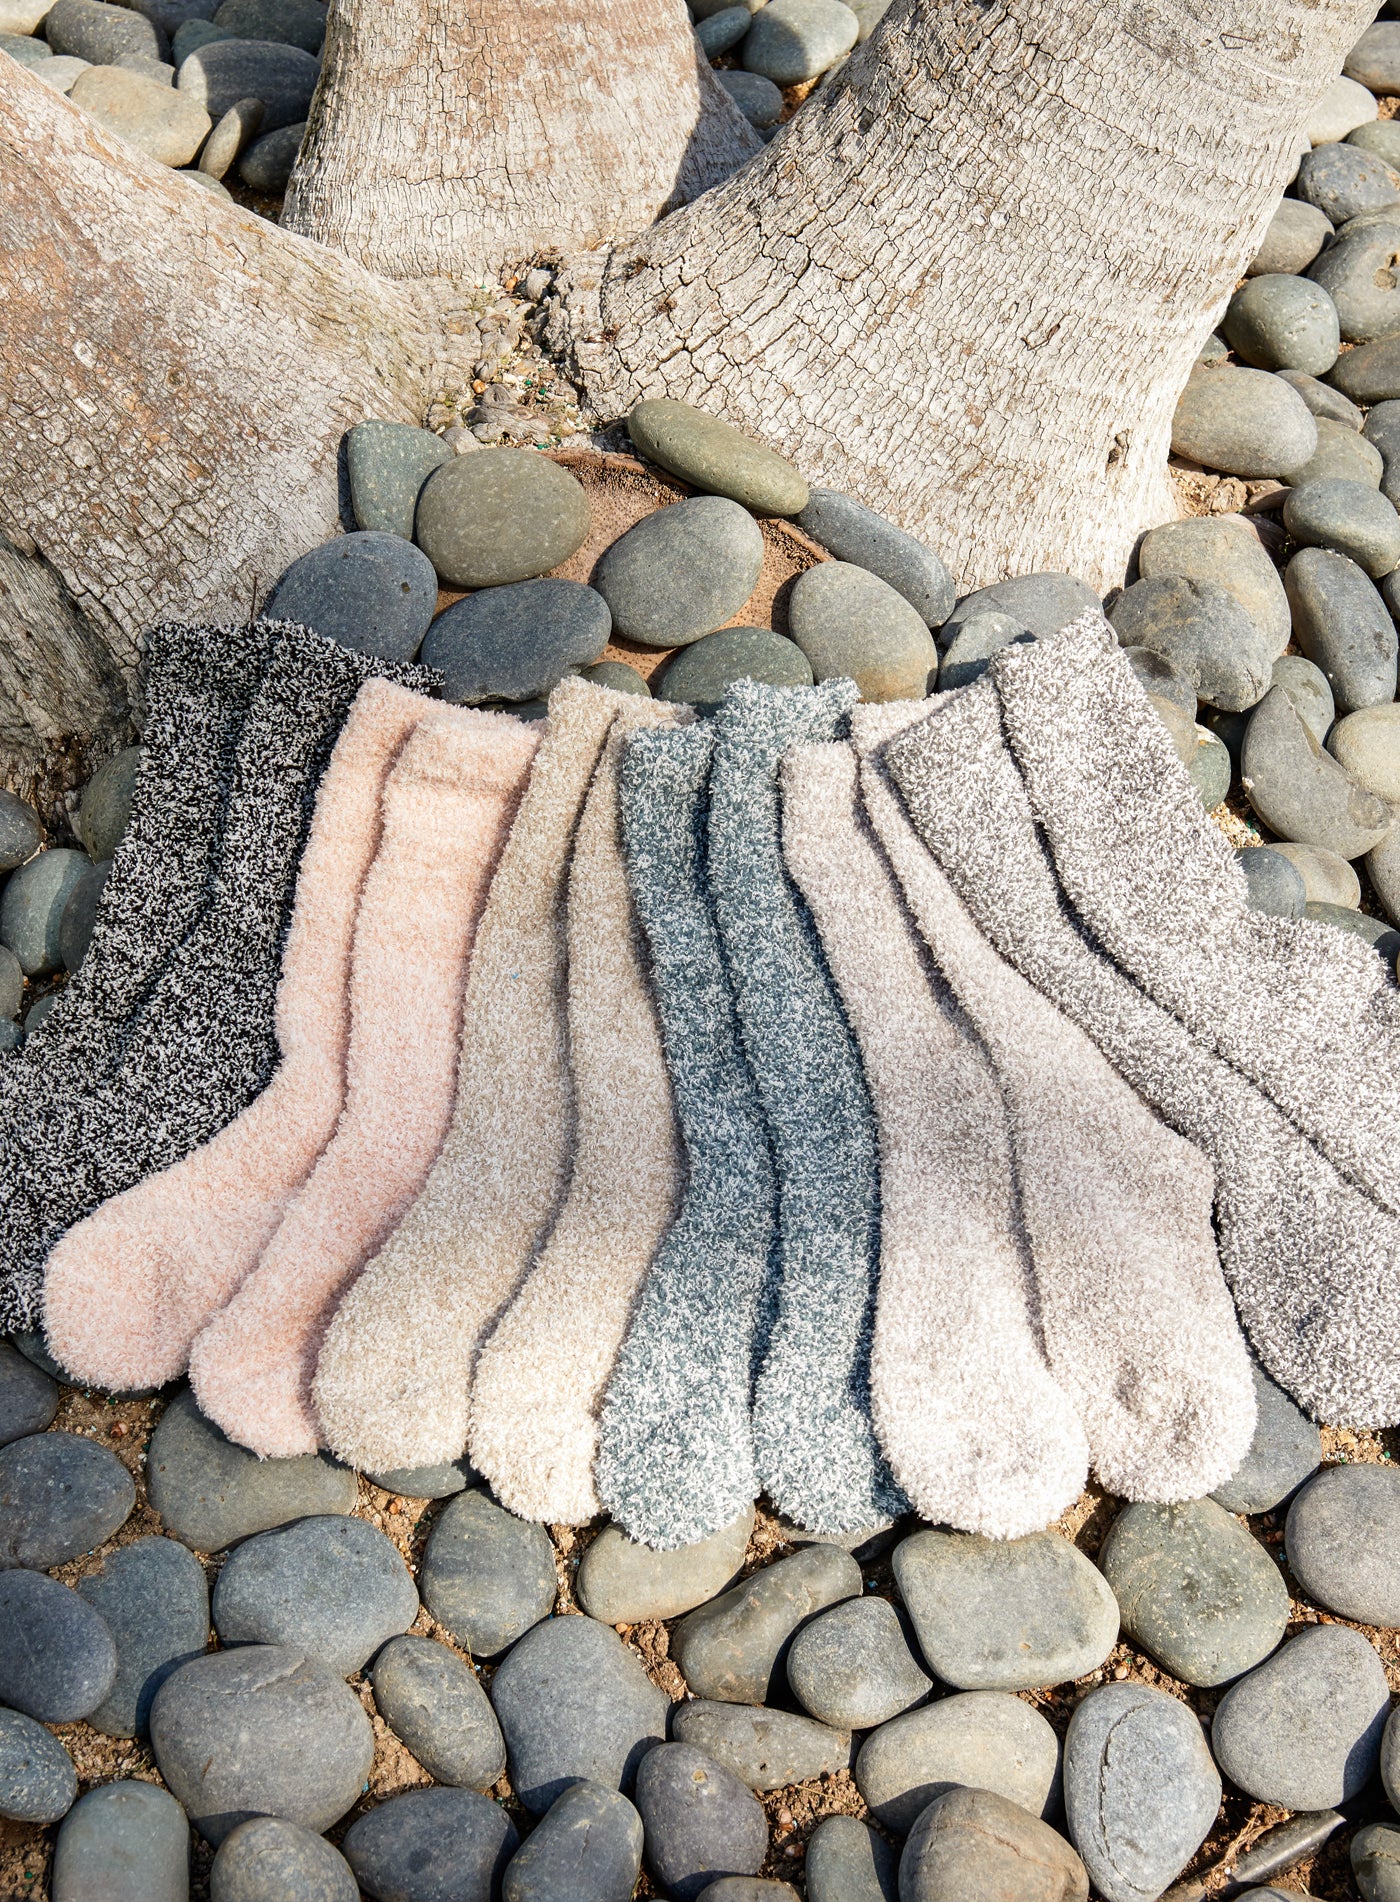 Cozychic Ombre Socks By Barefoot Dreams – Bella Vita Gifts & Interiors